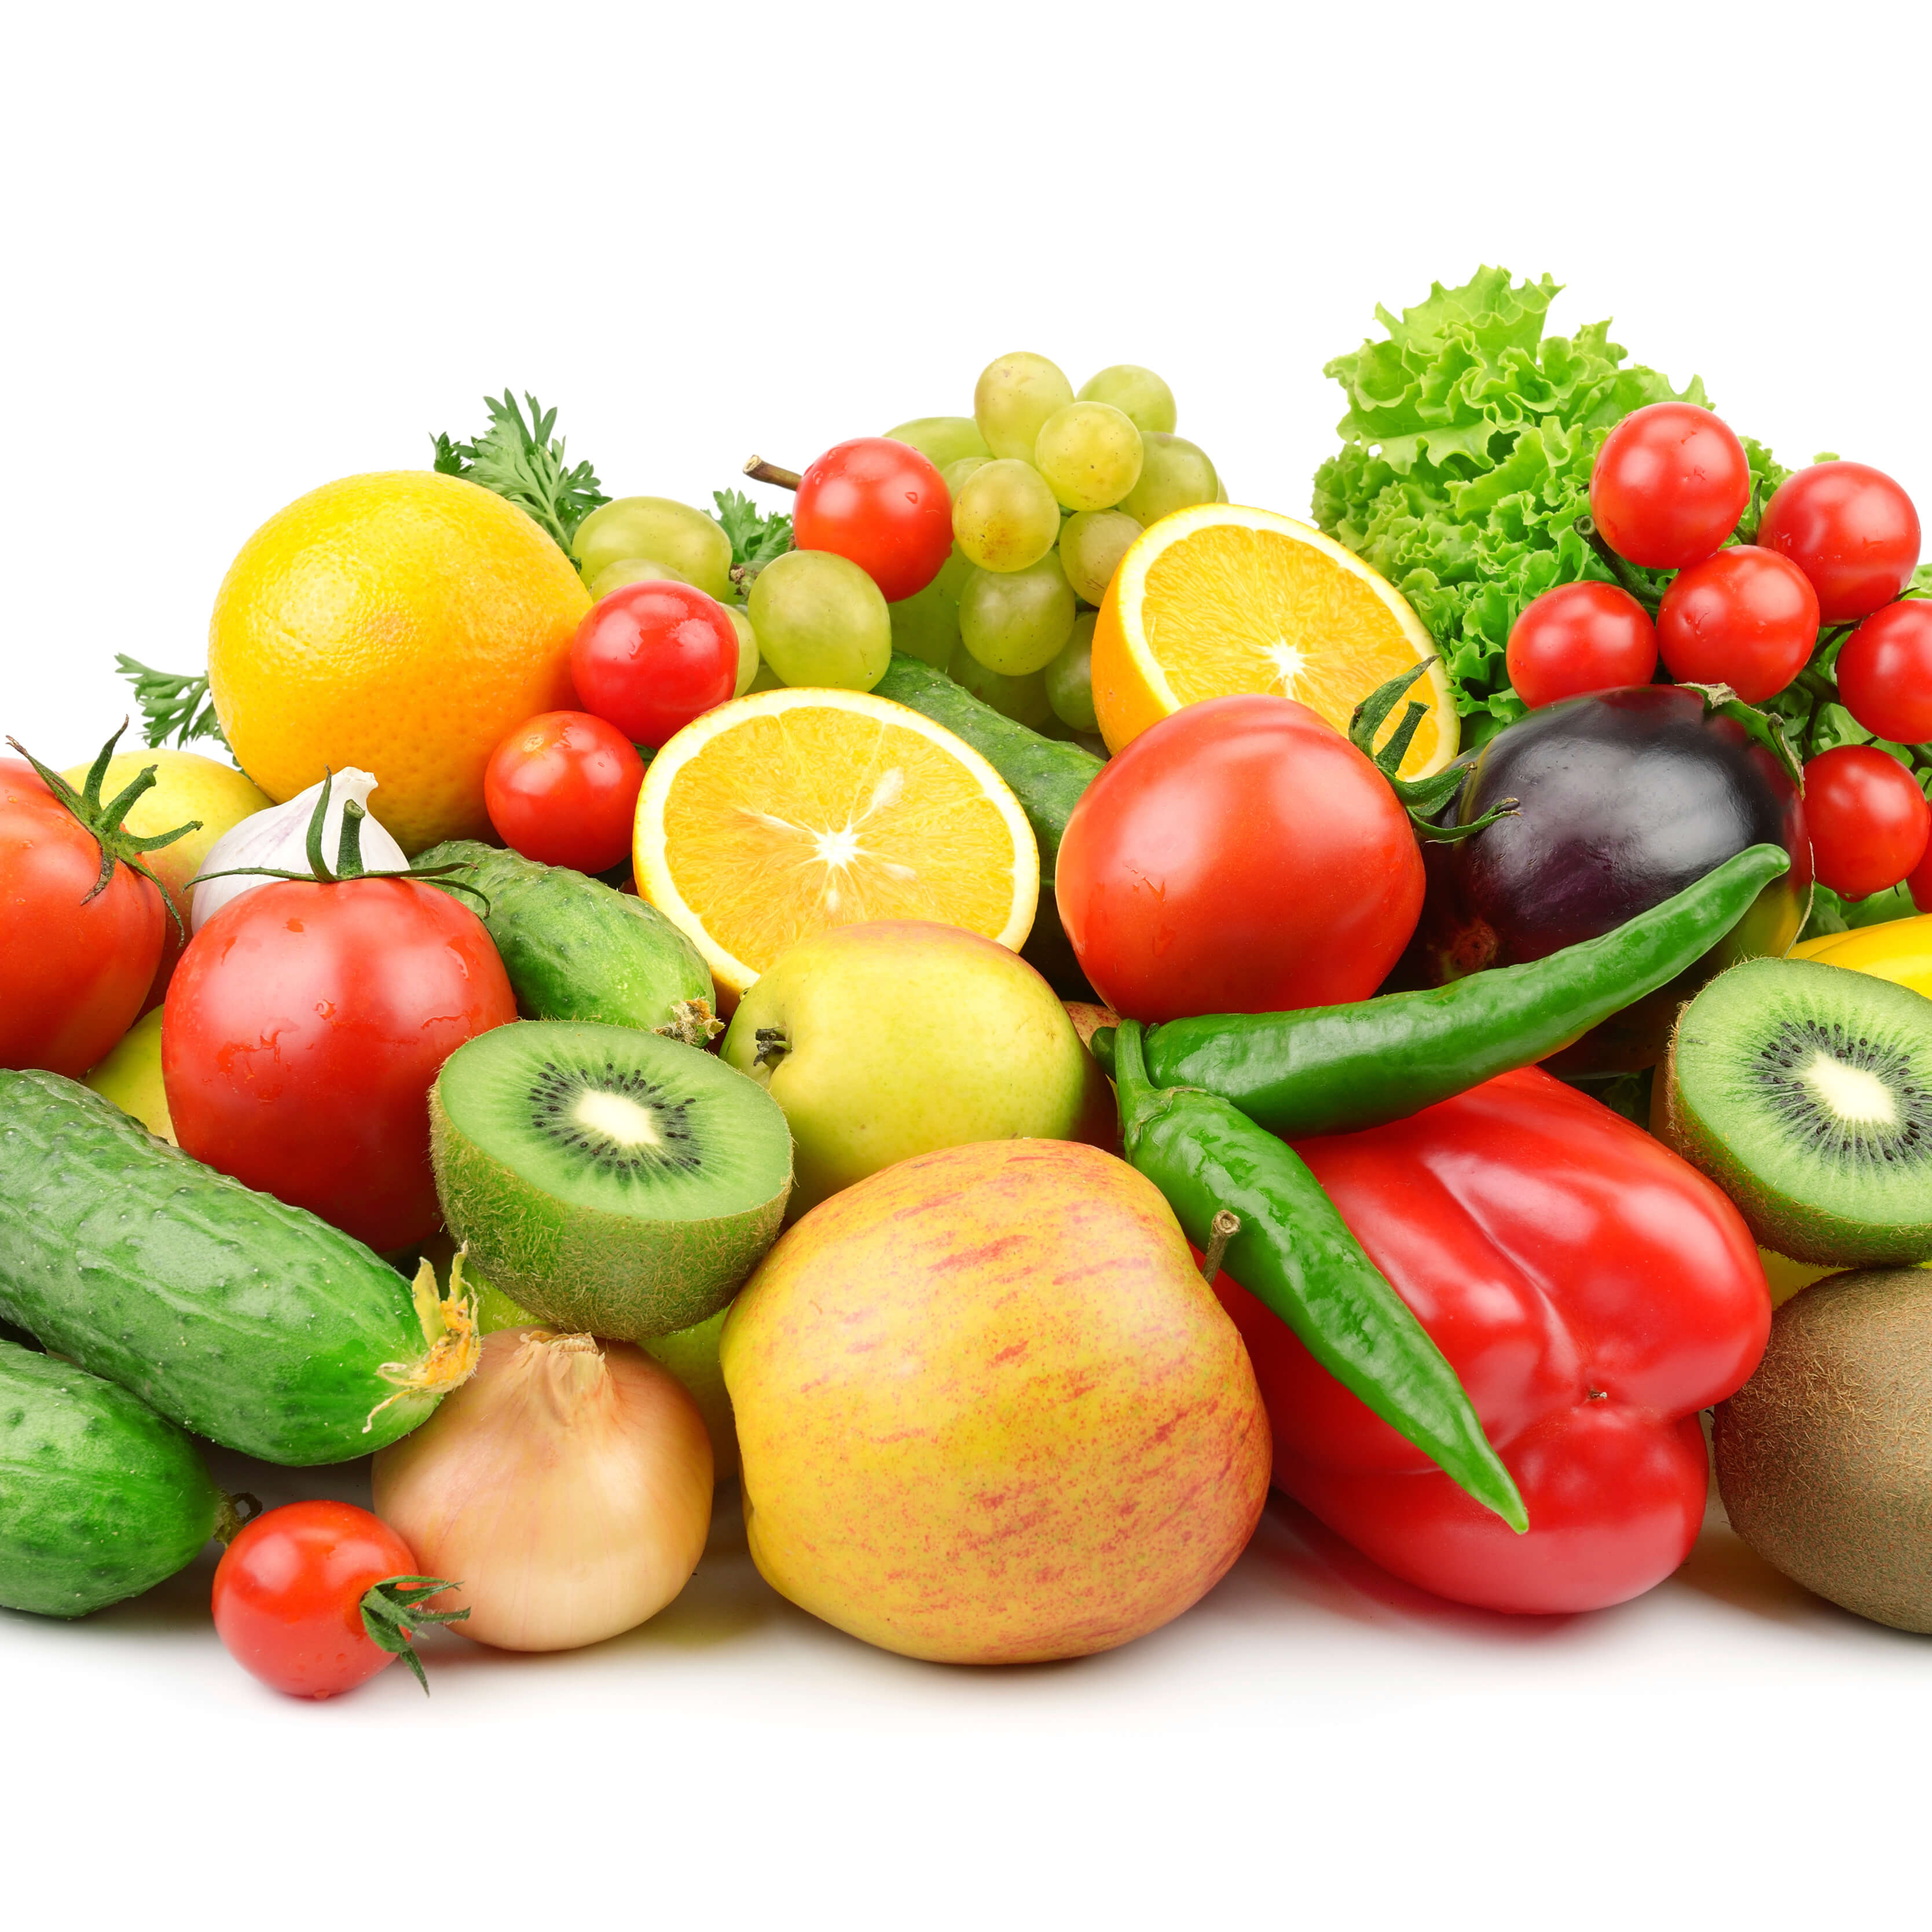 assortment of fruits and vegetables on a white background